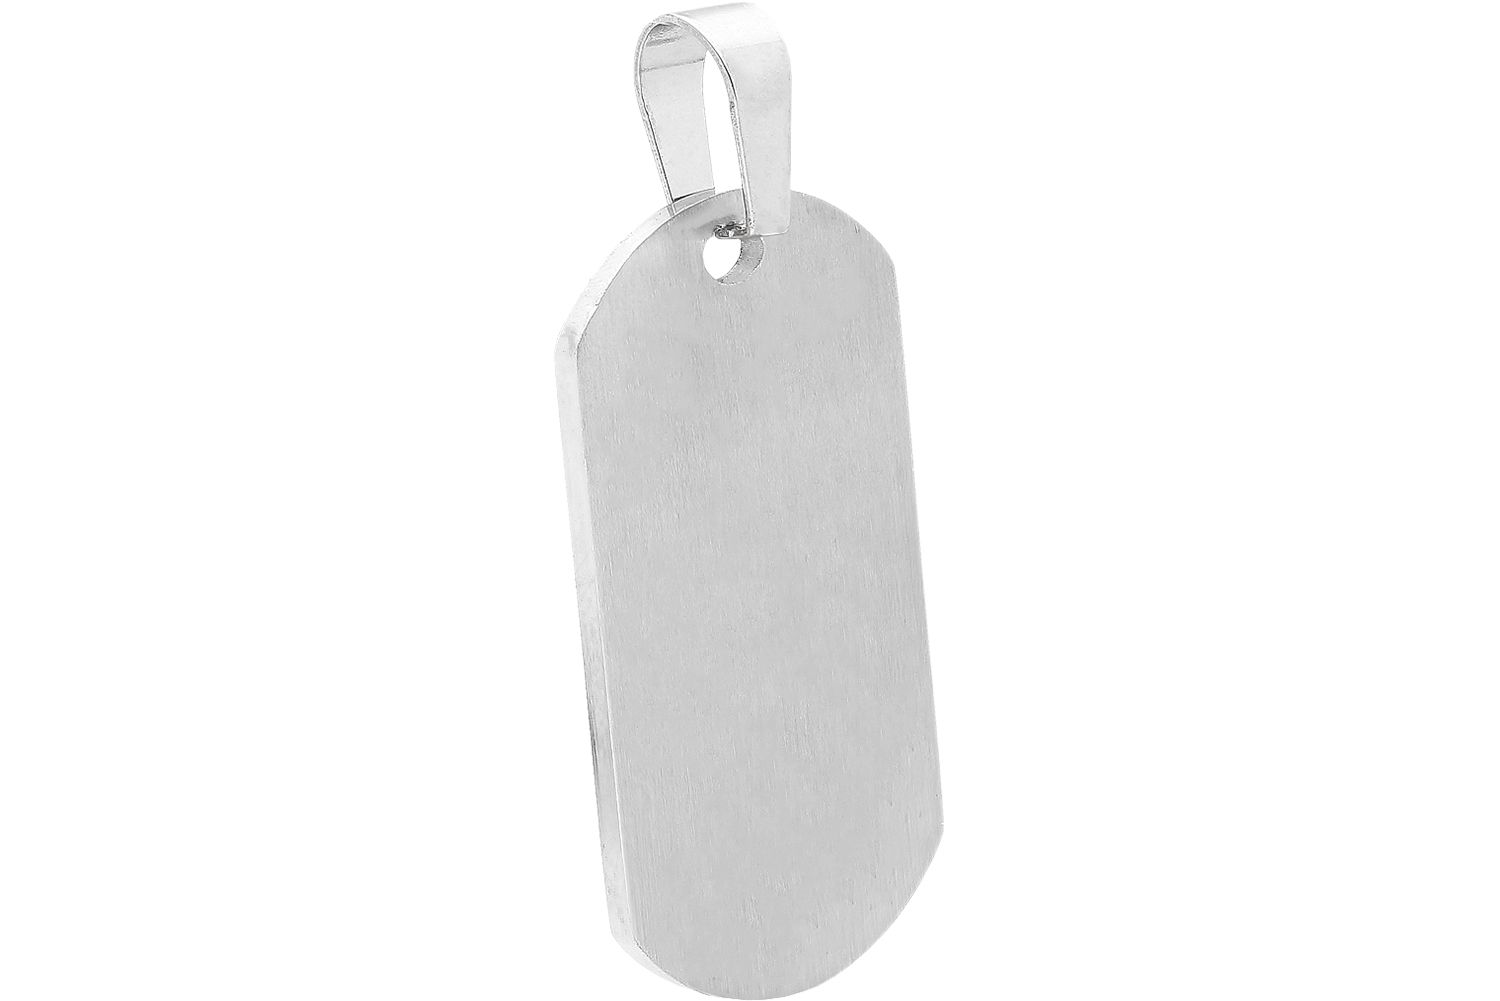 Stainless steel dog tag highly polished / matt